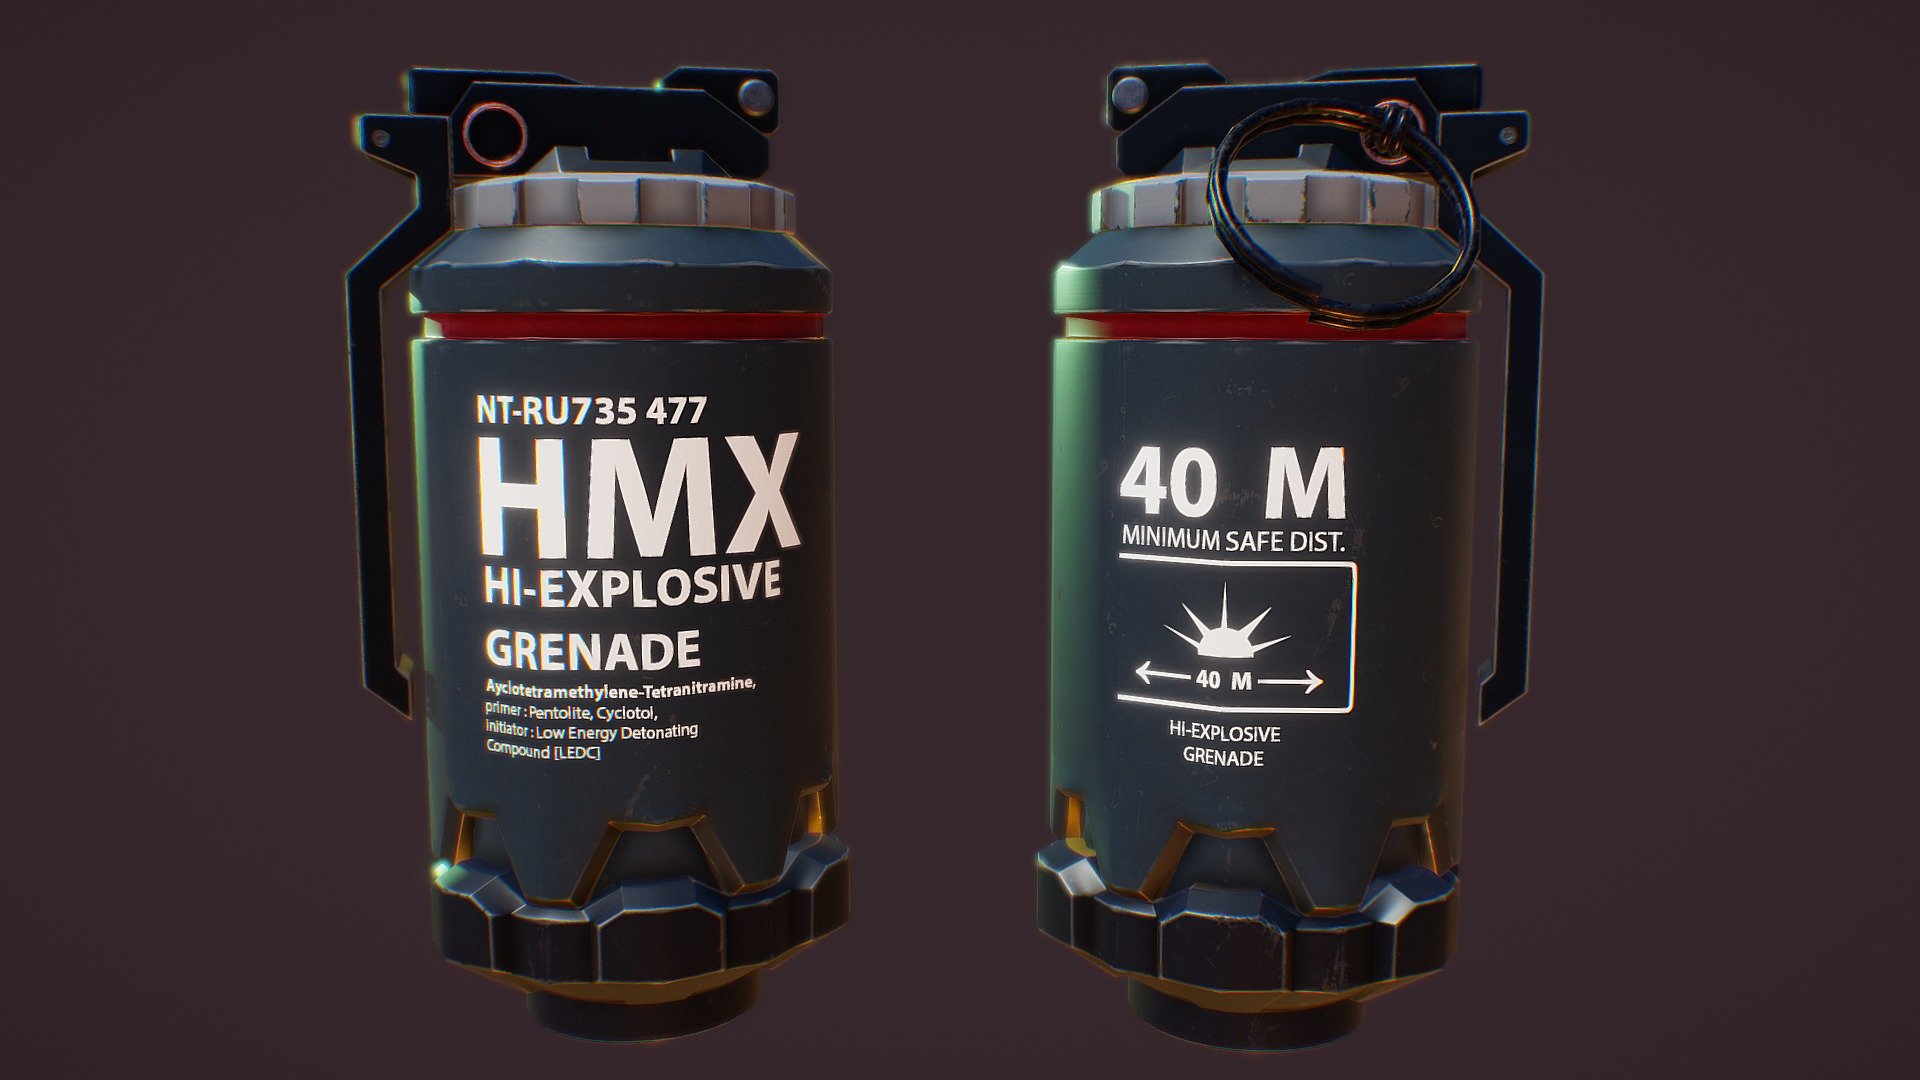 Low poly Grenade asset based on concept art of Ben Mauro for the movie Elysium.
Modeling/Uvs in Maya, baking in Substance Painter, texturing in Photoshop and Quixe. Started working on it to practice hard surface as part of an old polycount monthly challenge 3d model